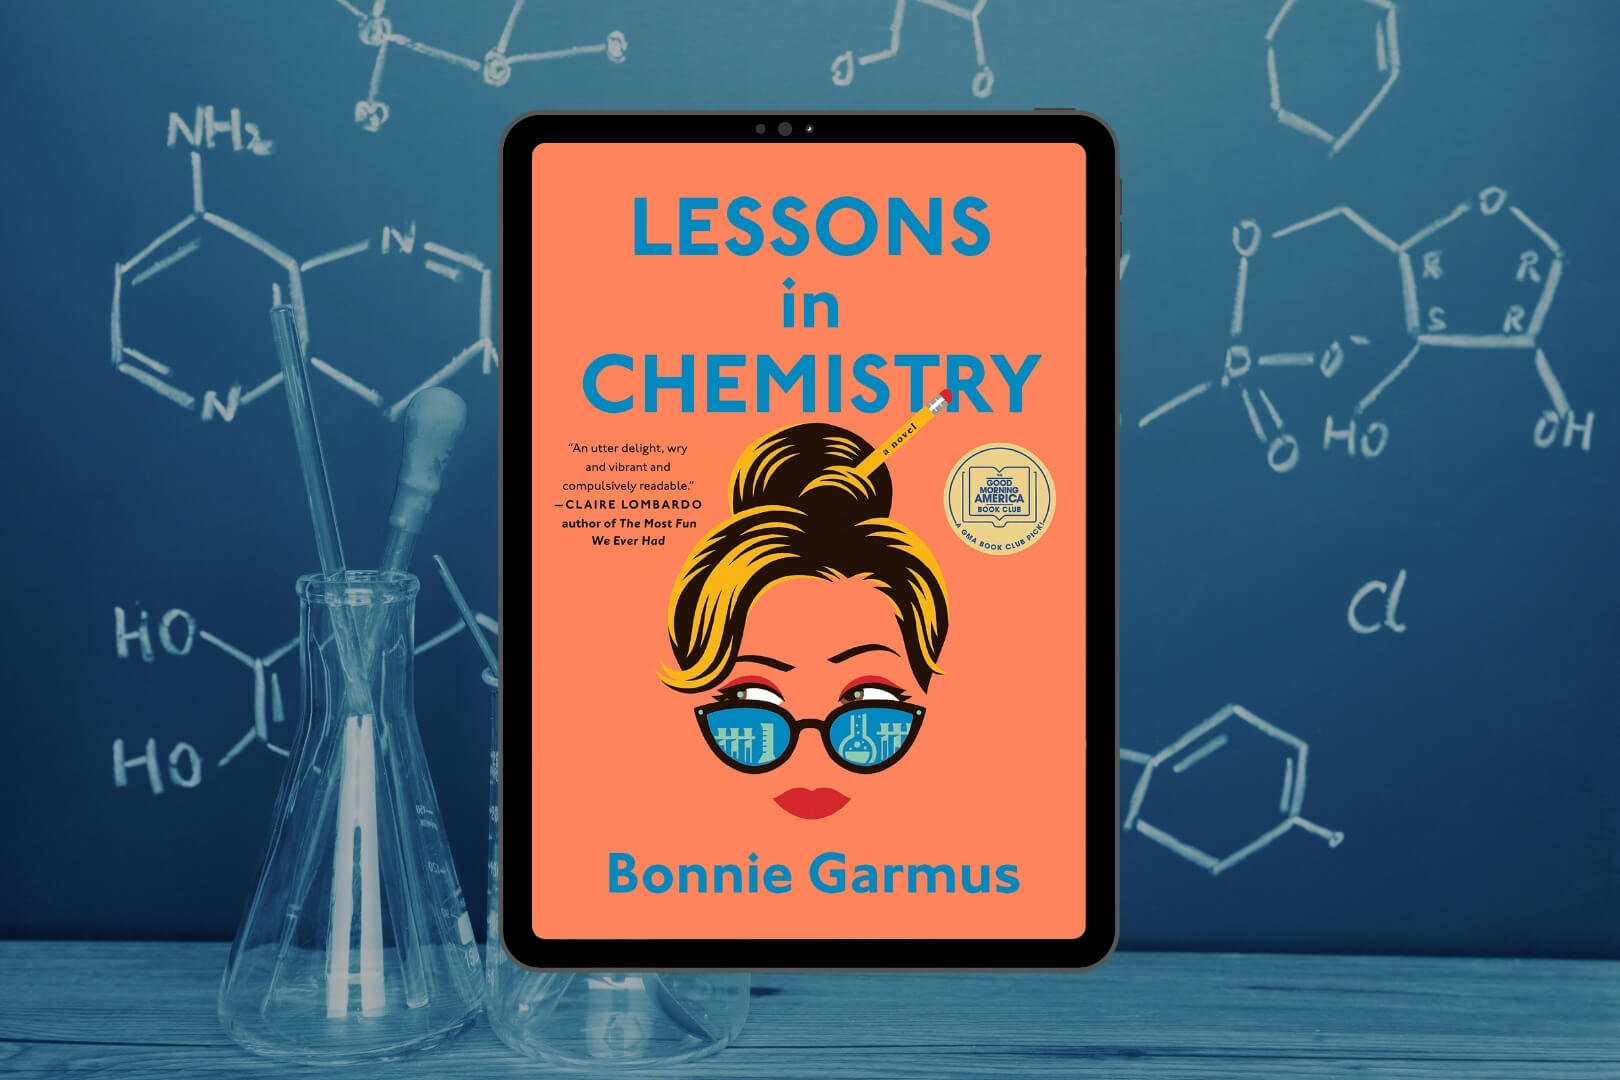 Book Club Questions for Lessons in Chemistry by Bonnie Garmus